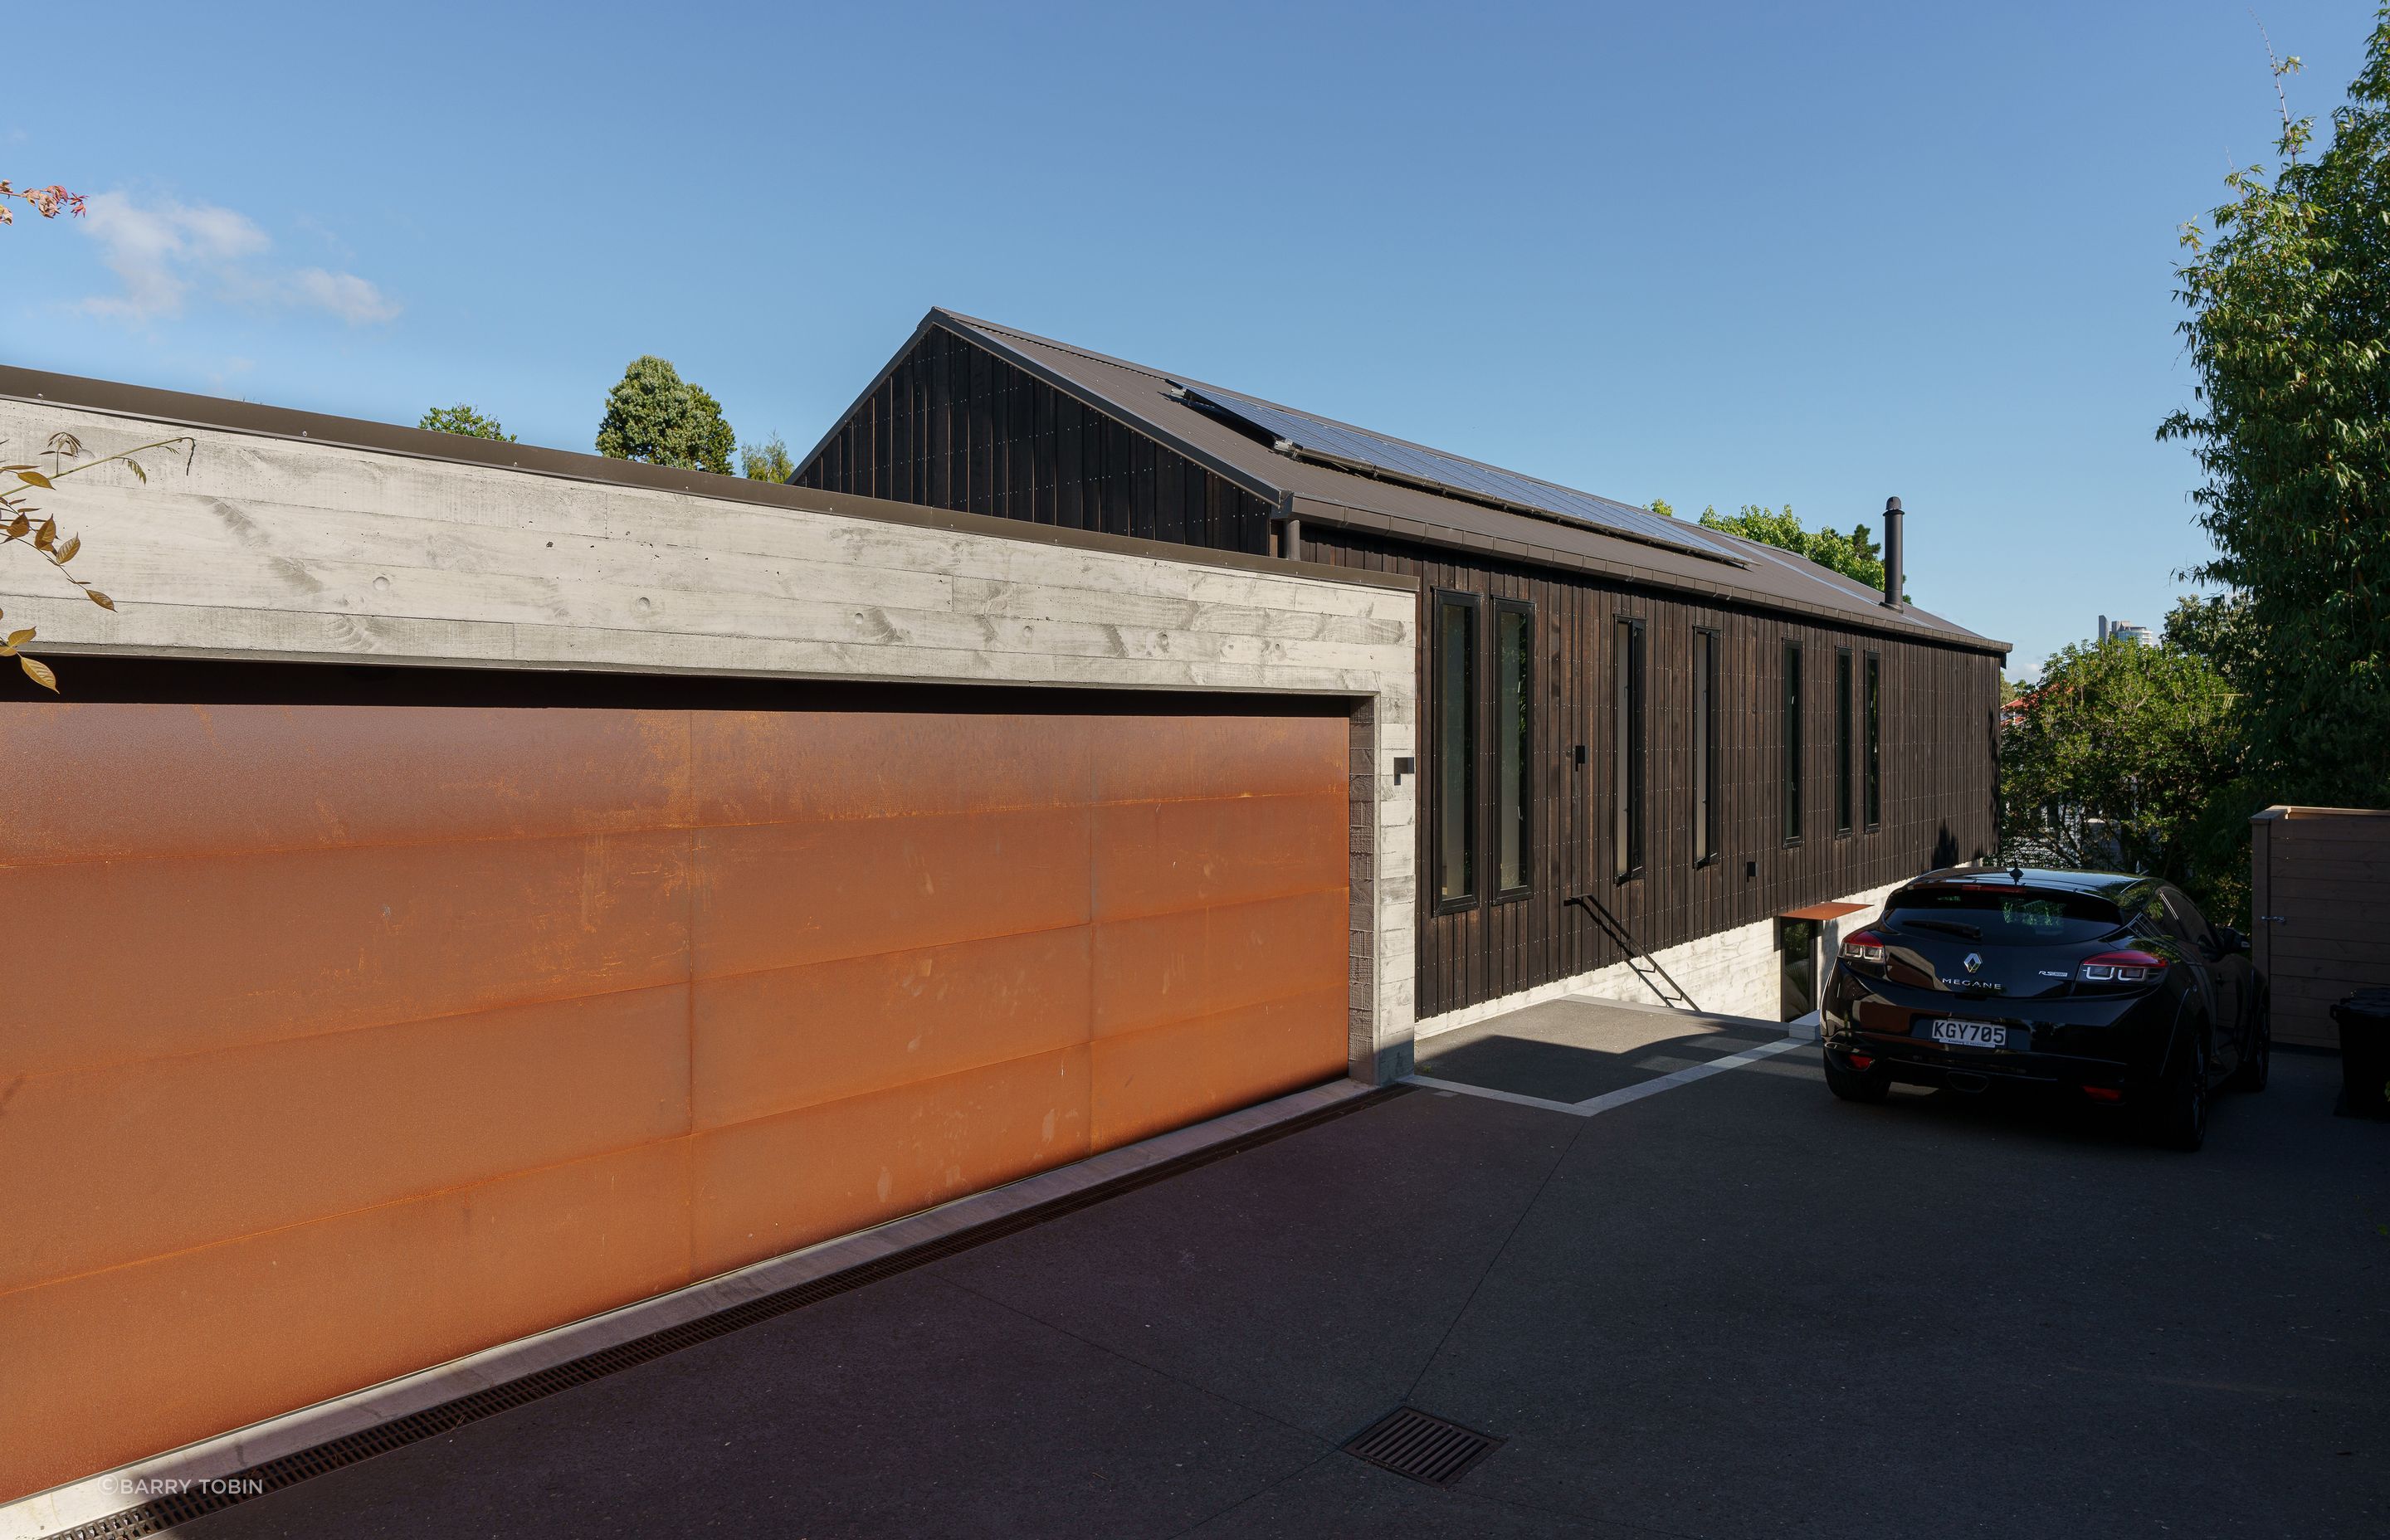 Smaller windows on the driveway side of the house offer improved privacy. “The garage is half full of bikes, skis and sports gear,” says Clive.